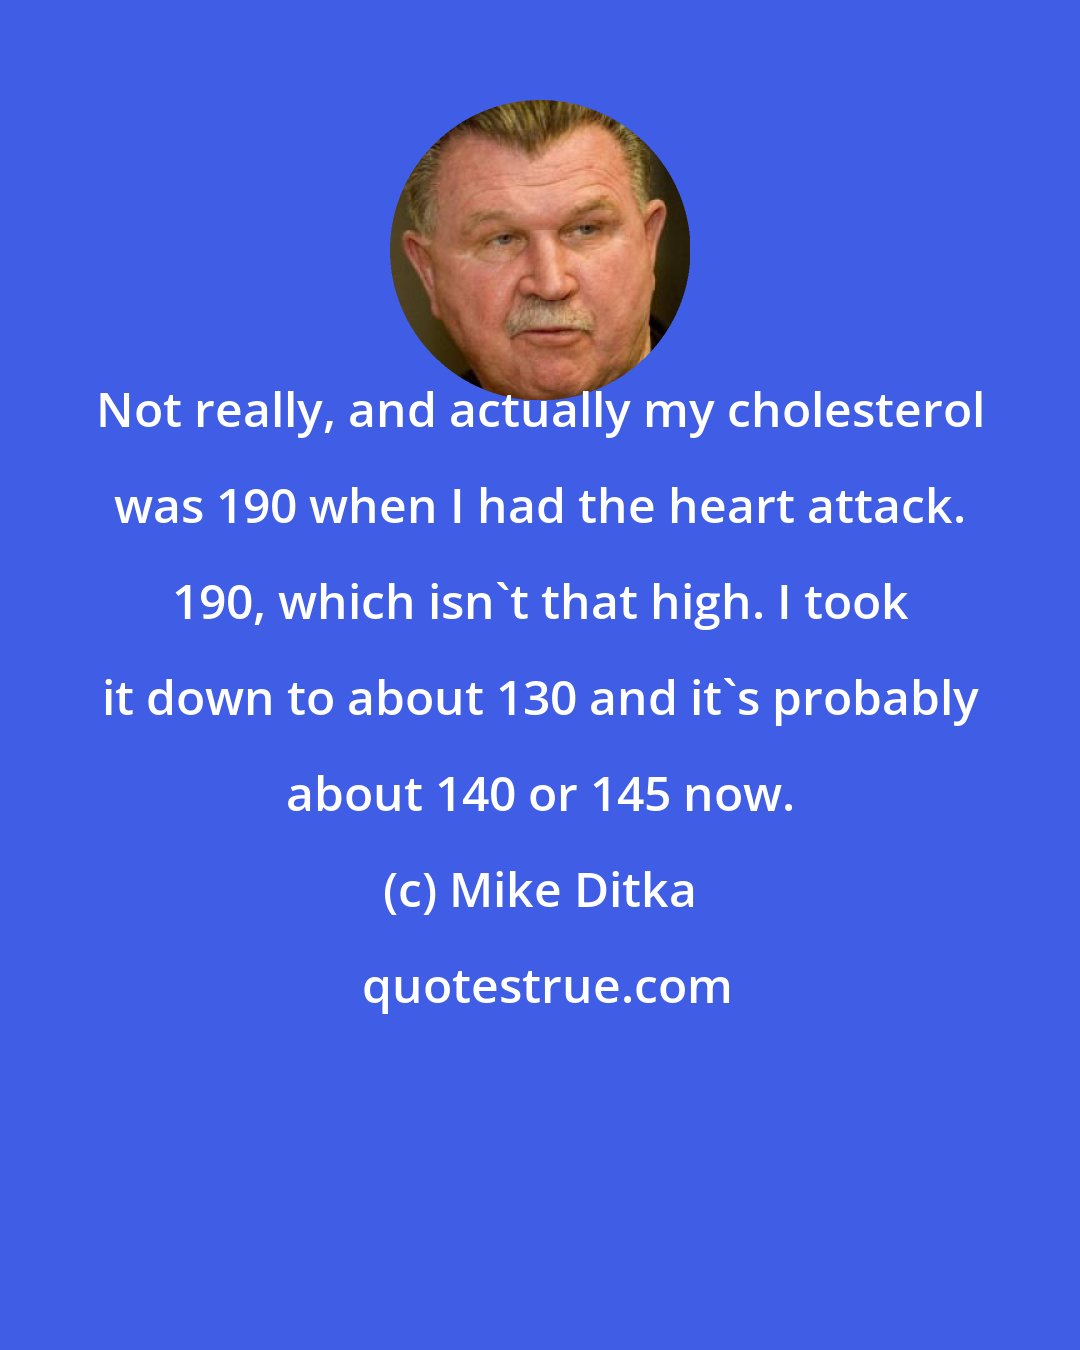 Mike Ditka: Not really, and actually my cholesterol was 190 when I had the heart attack. 190, which isn't that high. I took it down to about 130 and it's probably about 140 or 145 now.